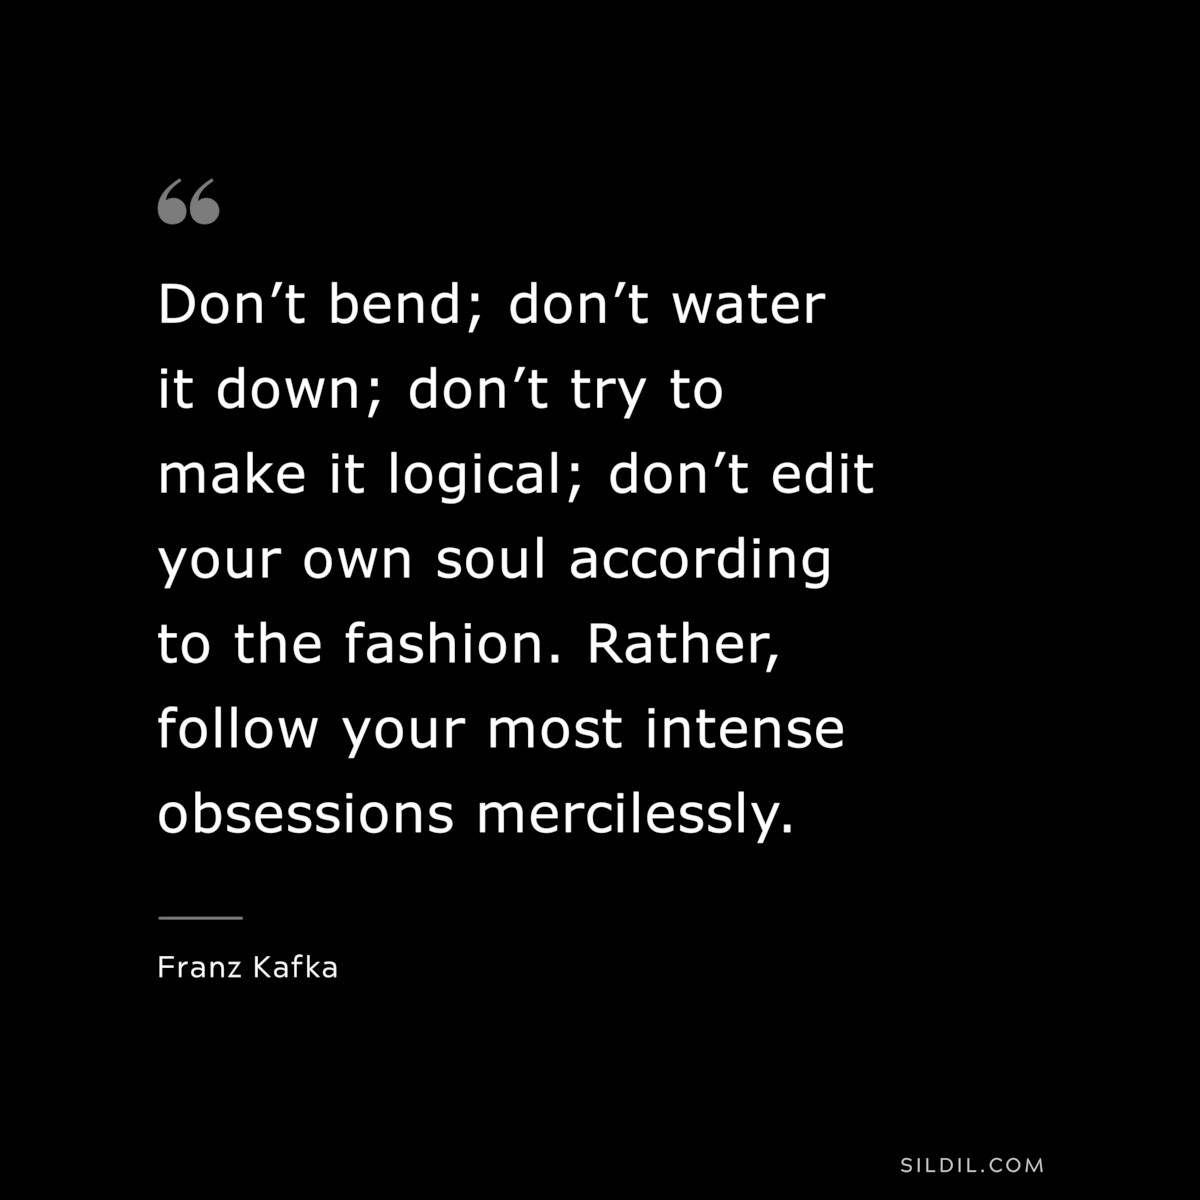 Don’t bend; don’t water it down; don’t try to make it logical; don’t edit your own soul according to the fashion. Rather, follow your most intense obsessions mercilessly. ― Franz Kafka